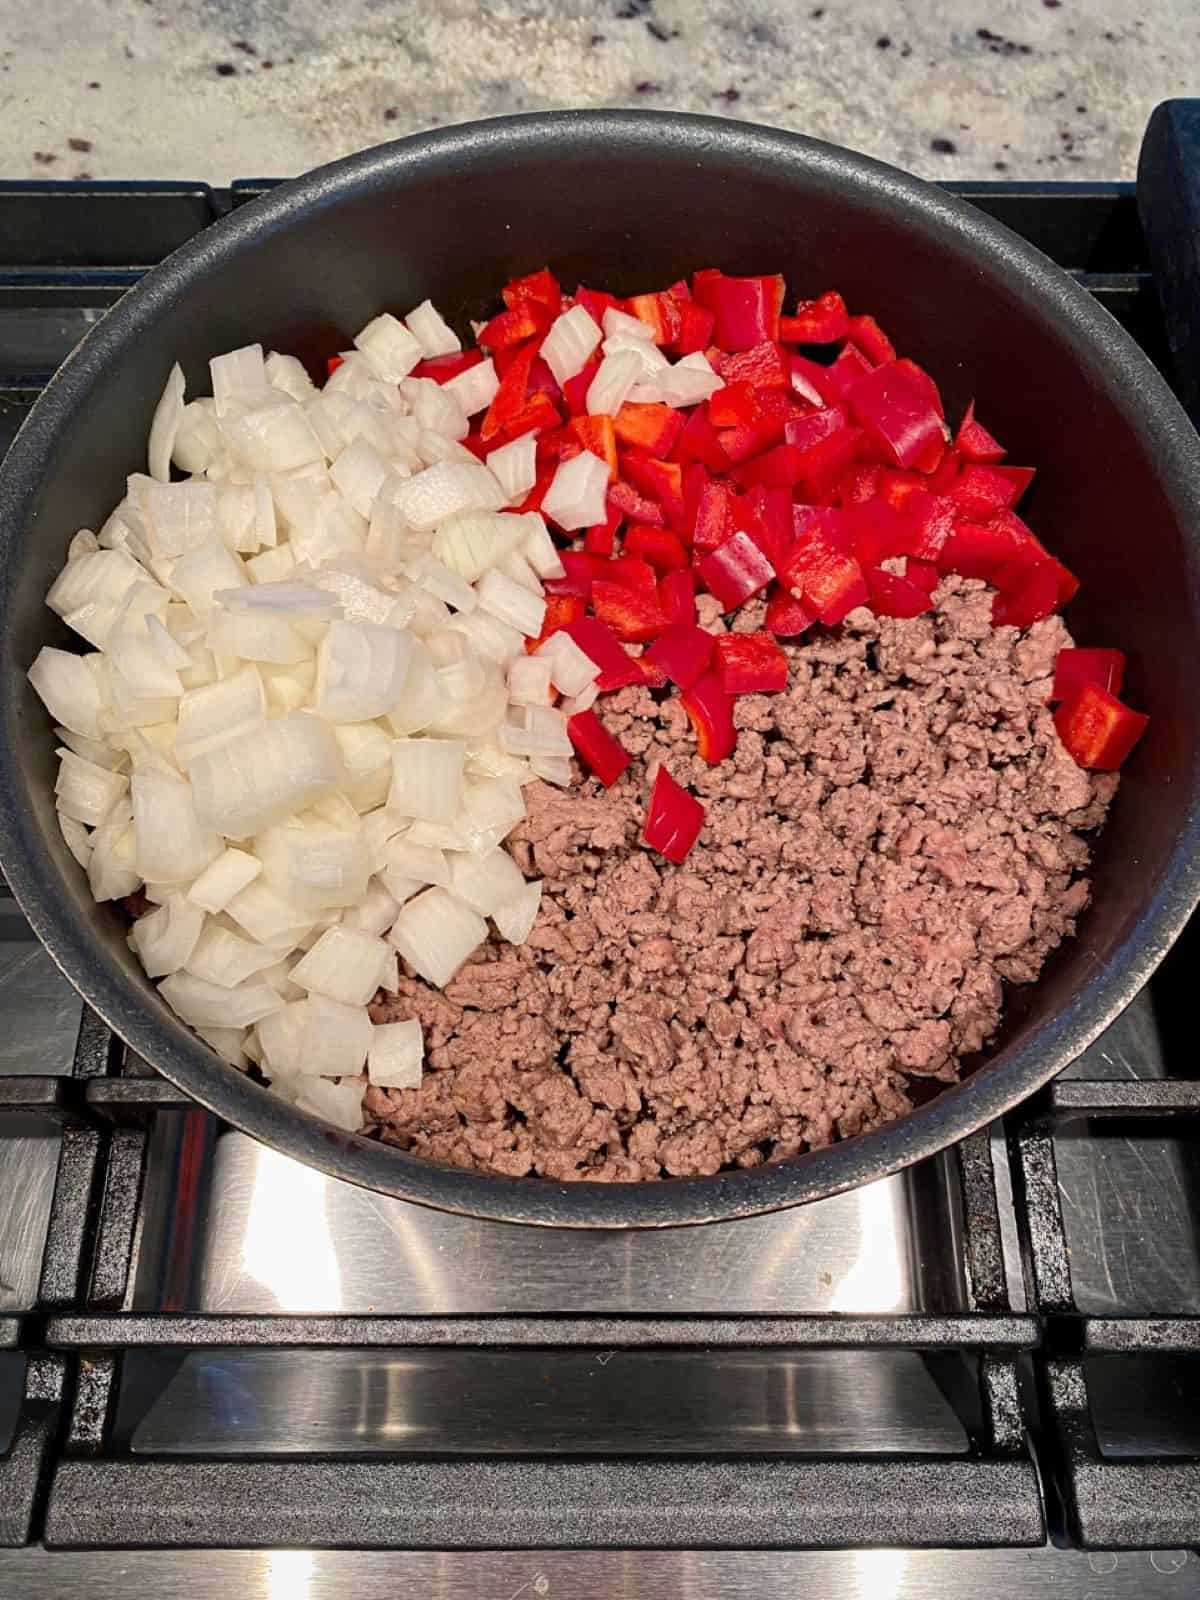 Ground beef browning in a skillet with onions and red bell peppers.